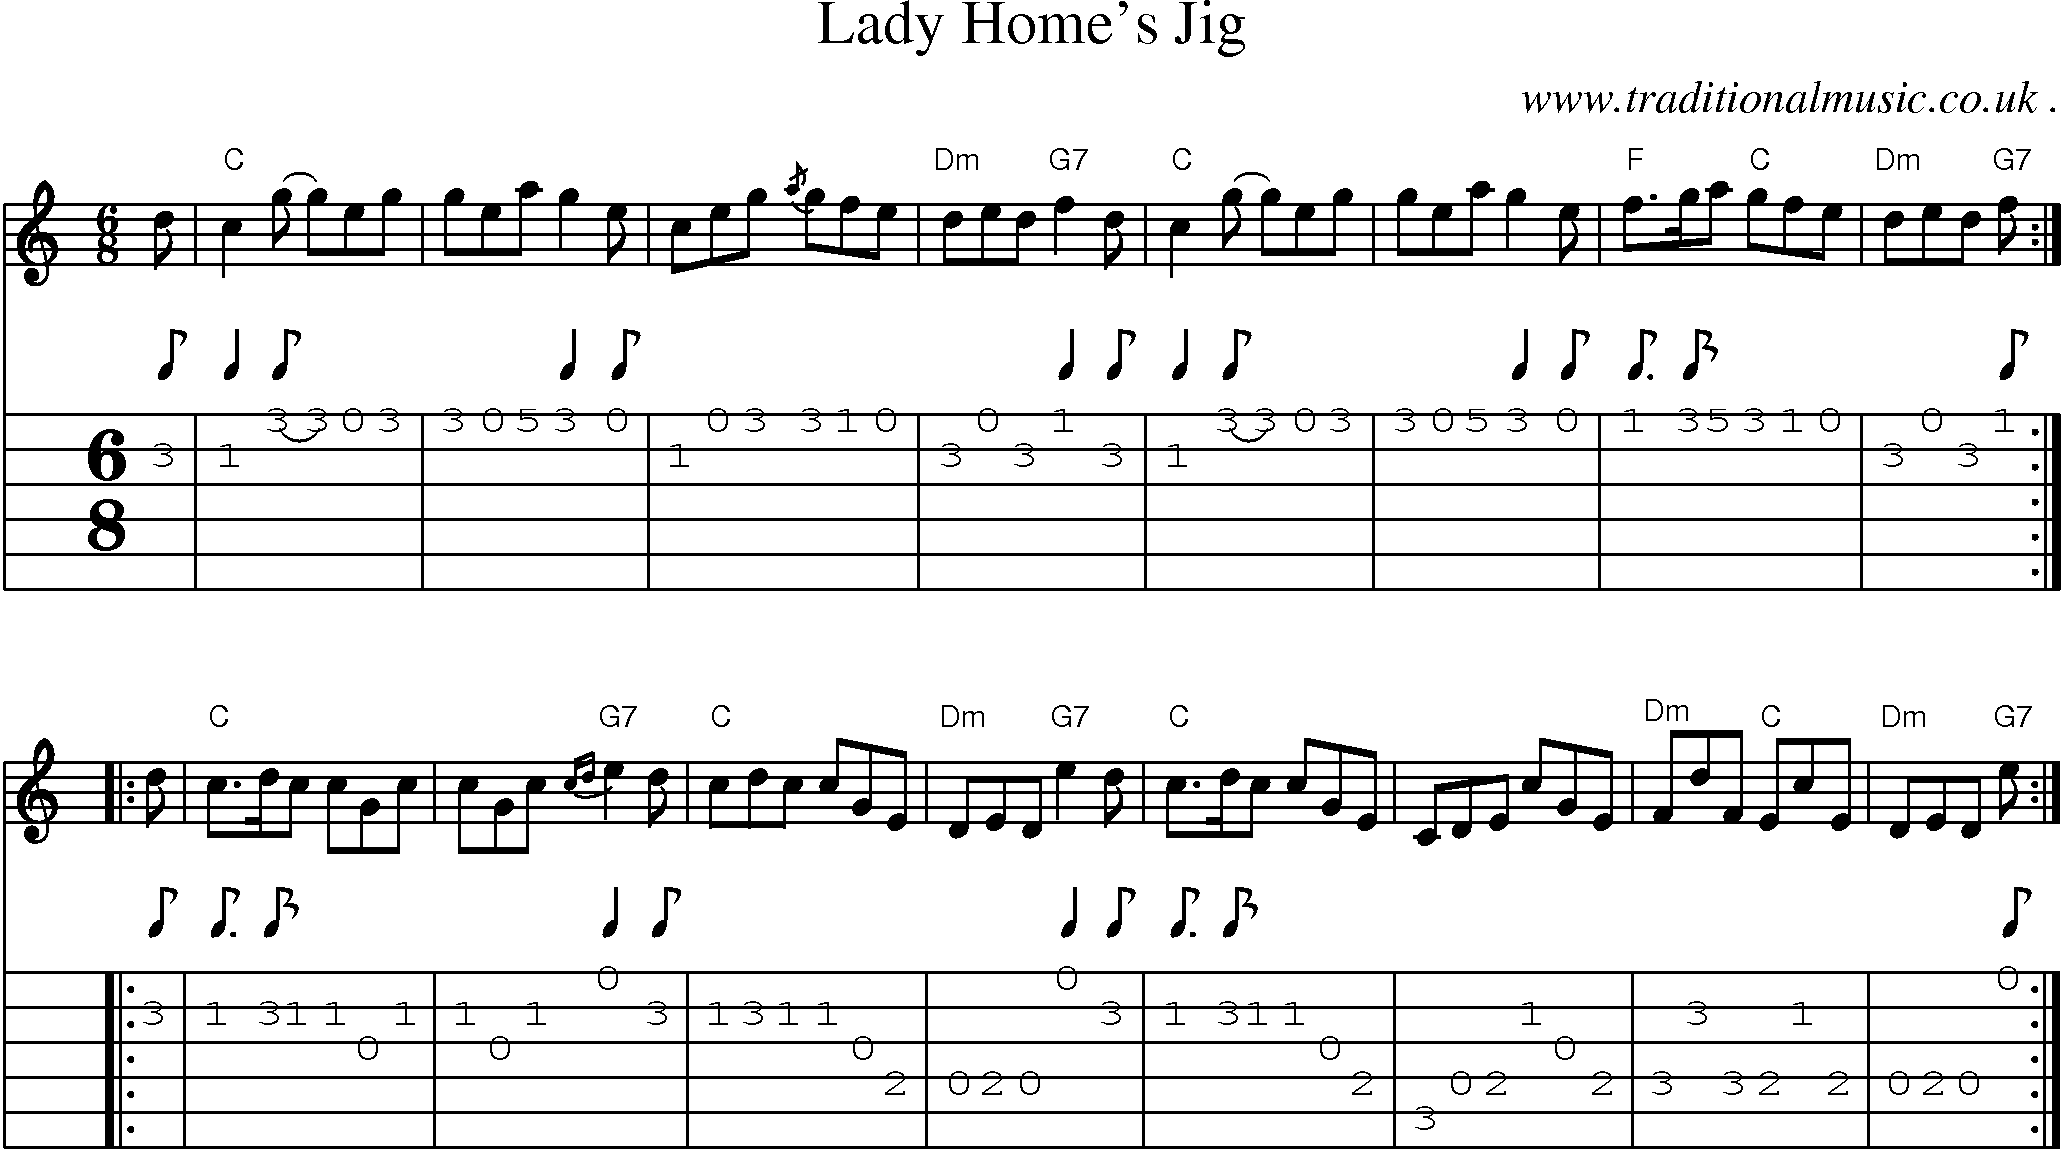 Sheet-music  score, Chords and Guitar Tabs for Lady Homes Jig